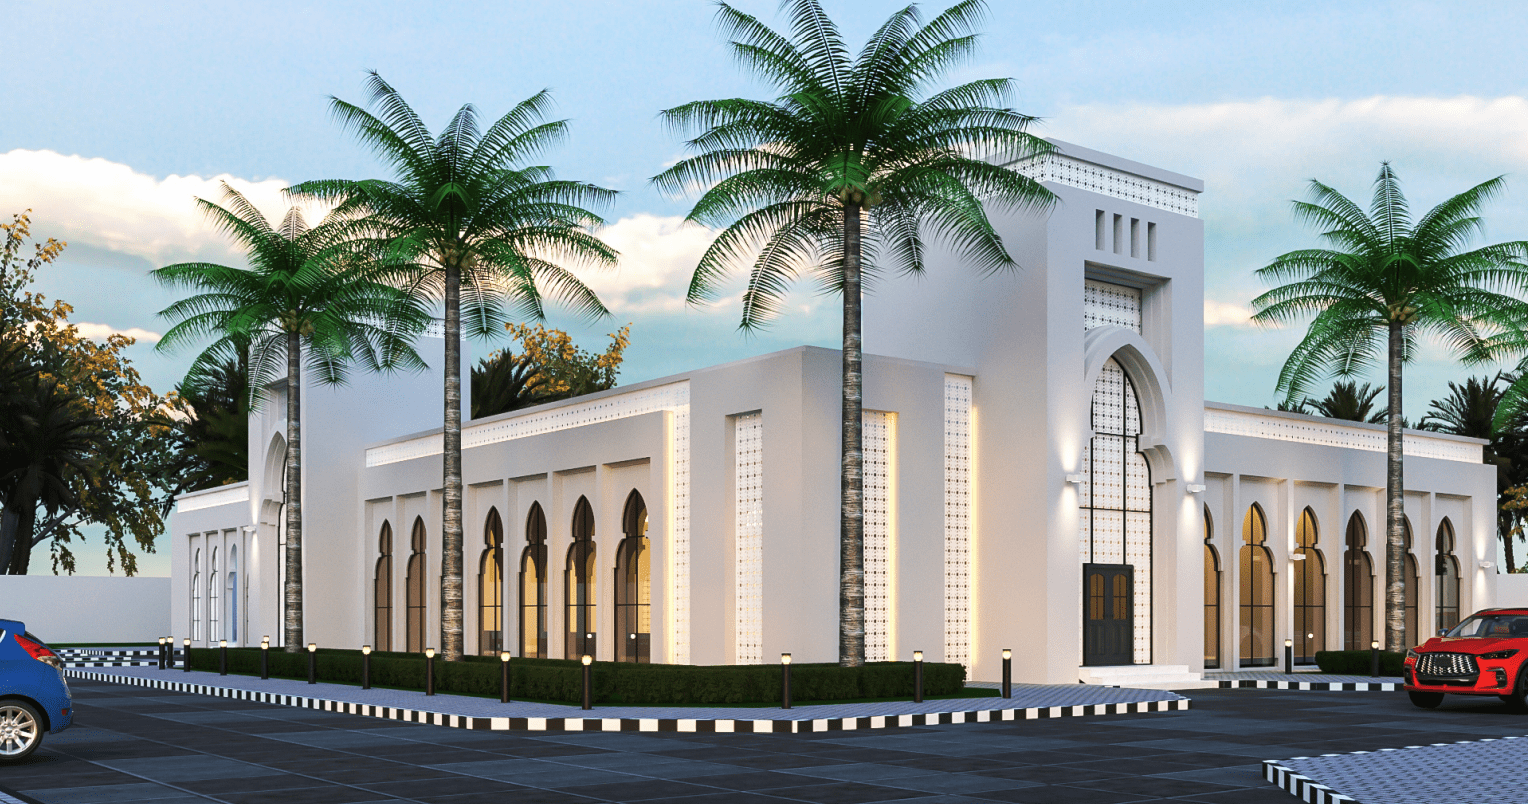 Building Dreams: The Proposed Islamic Center